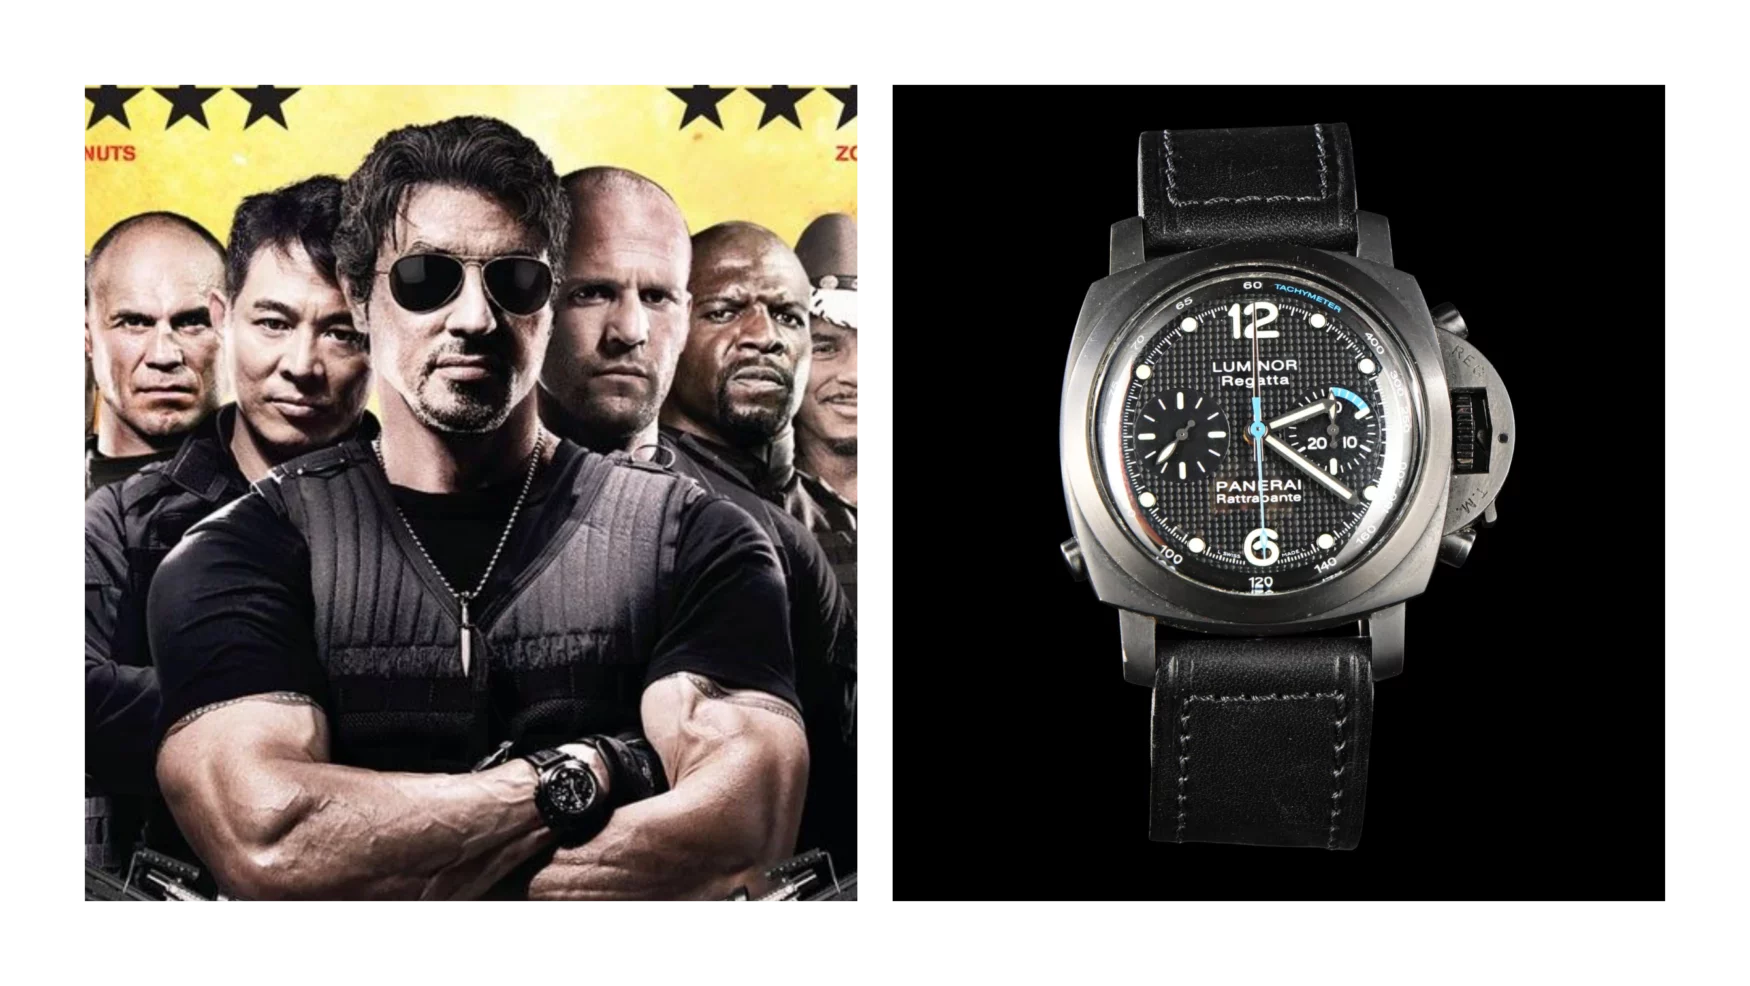 Sylvester Stallone’s Panerai split-seconds chrono watch worn in The Expendables is up for auction